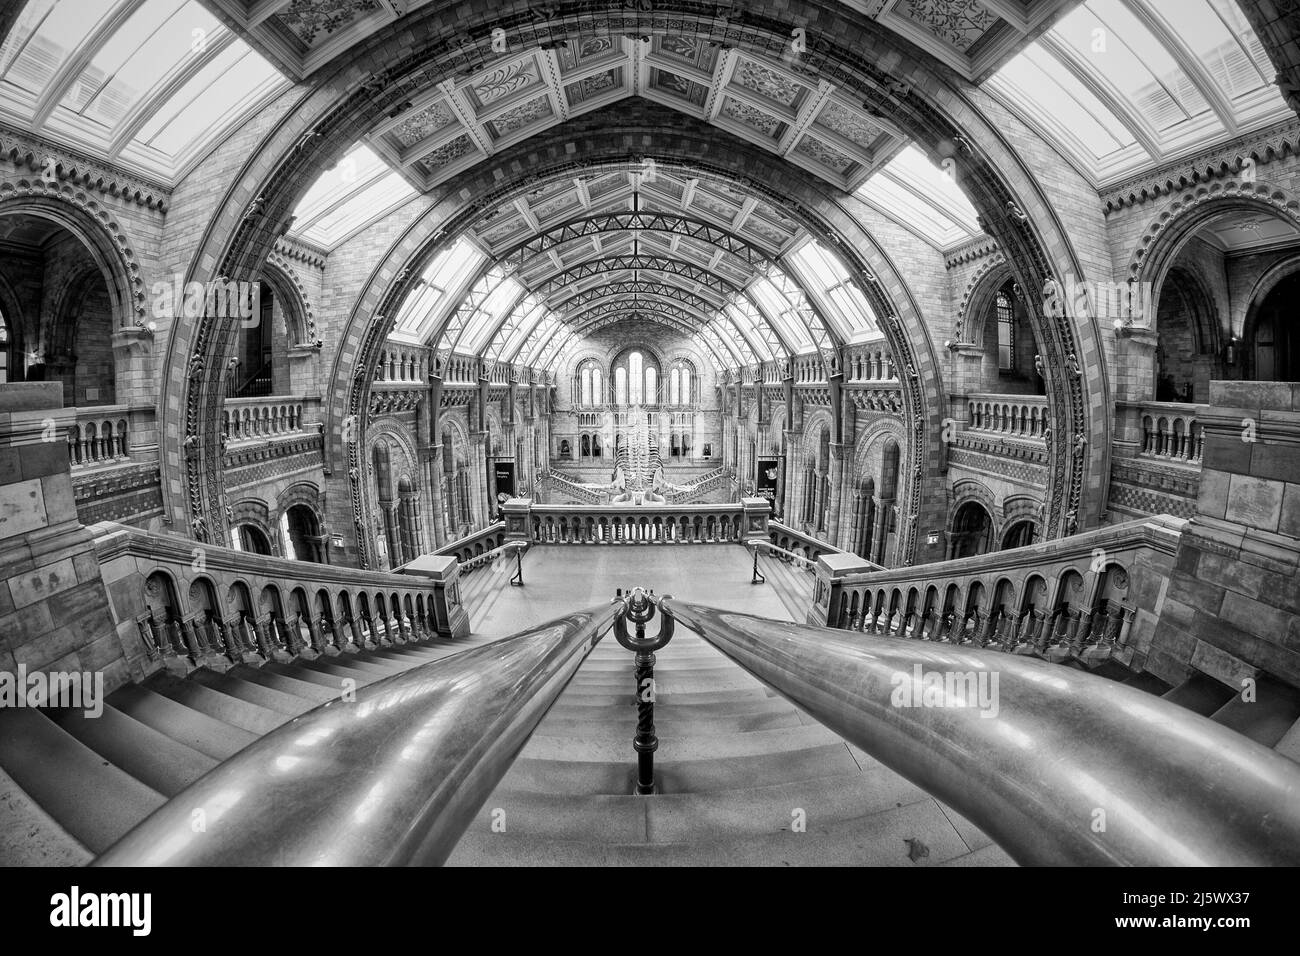 The Natural History Museum, London, Main Hall with Wide-angle Perspective Stock Photo